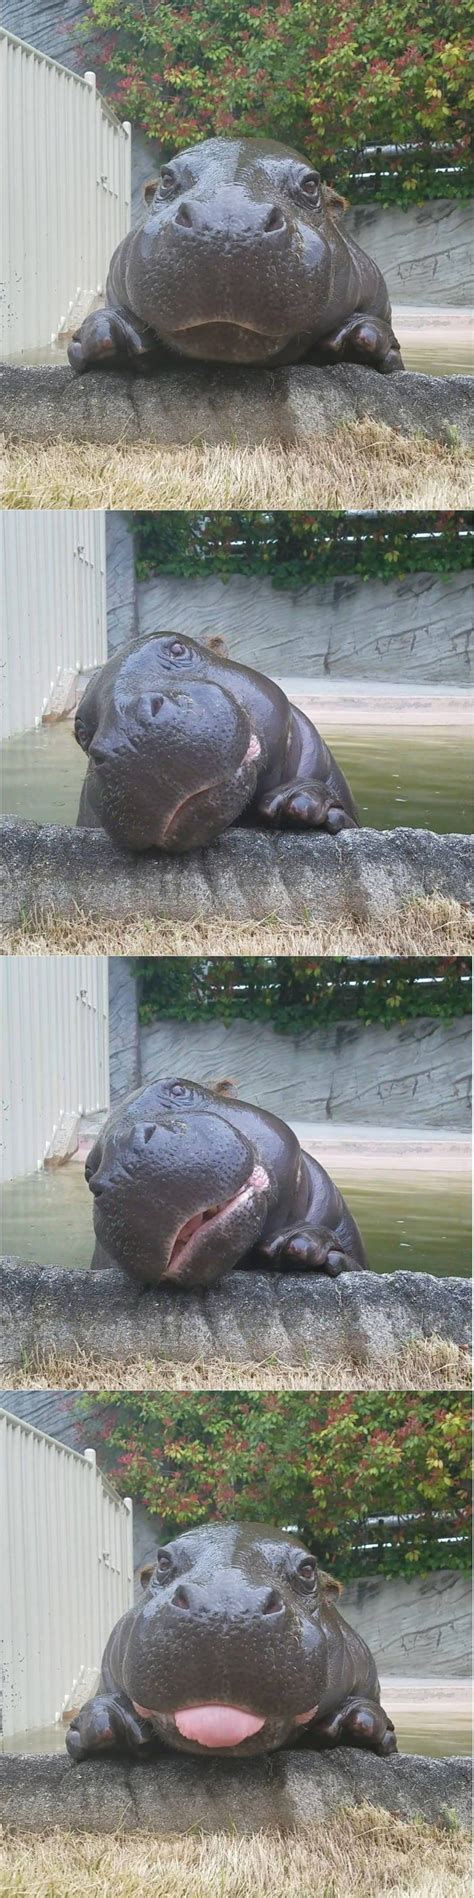 This Danger Water Potato Is Very Cute 9gag